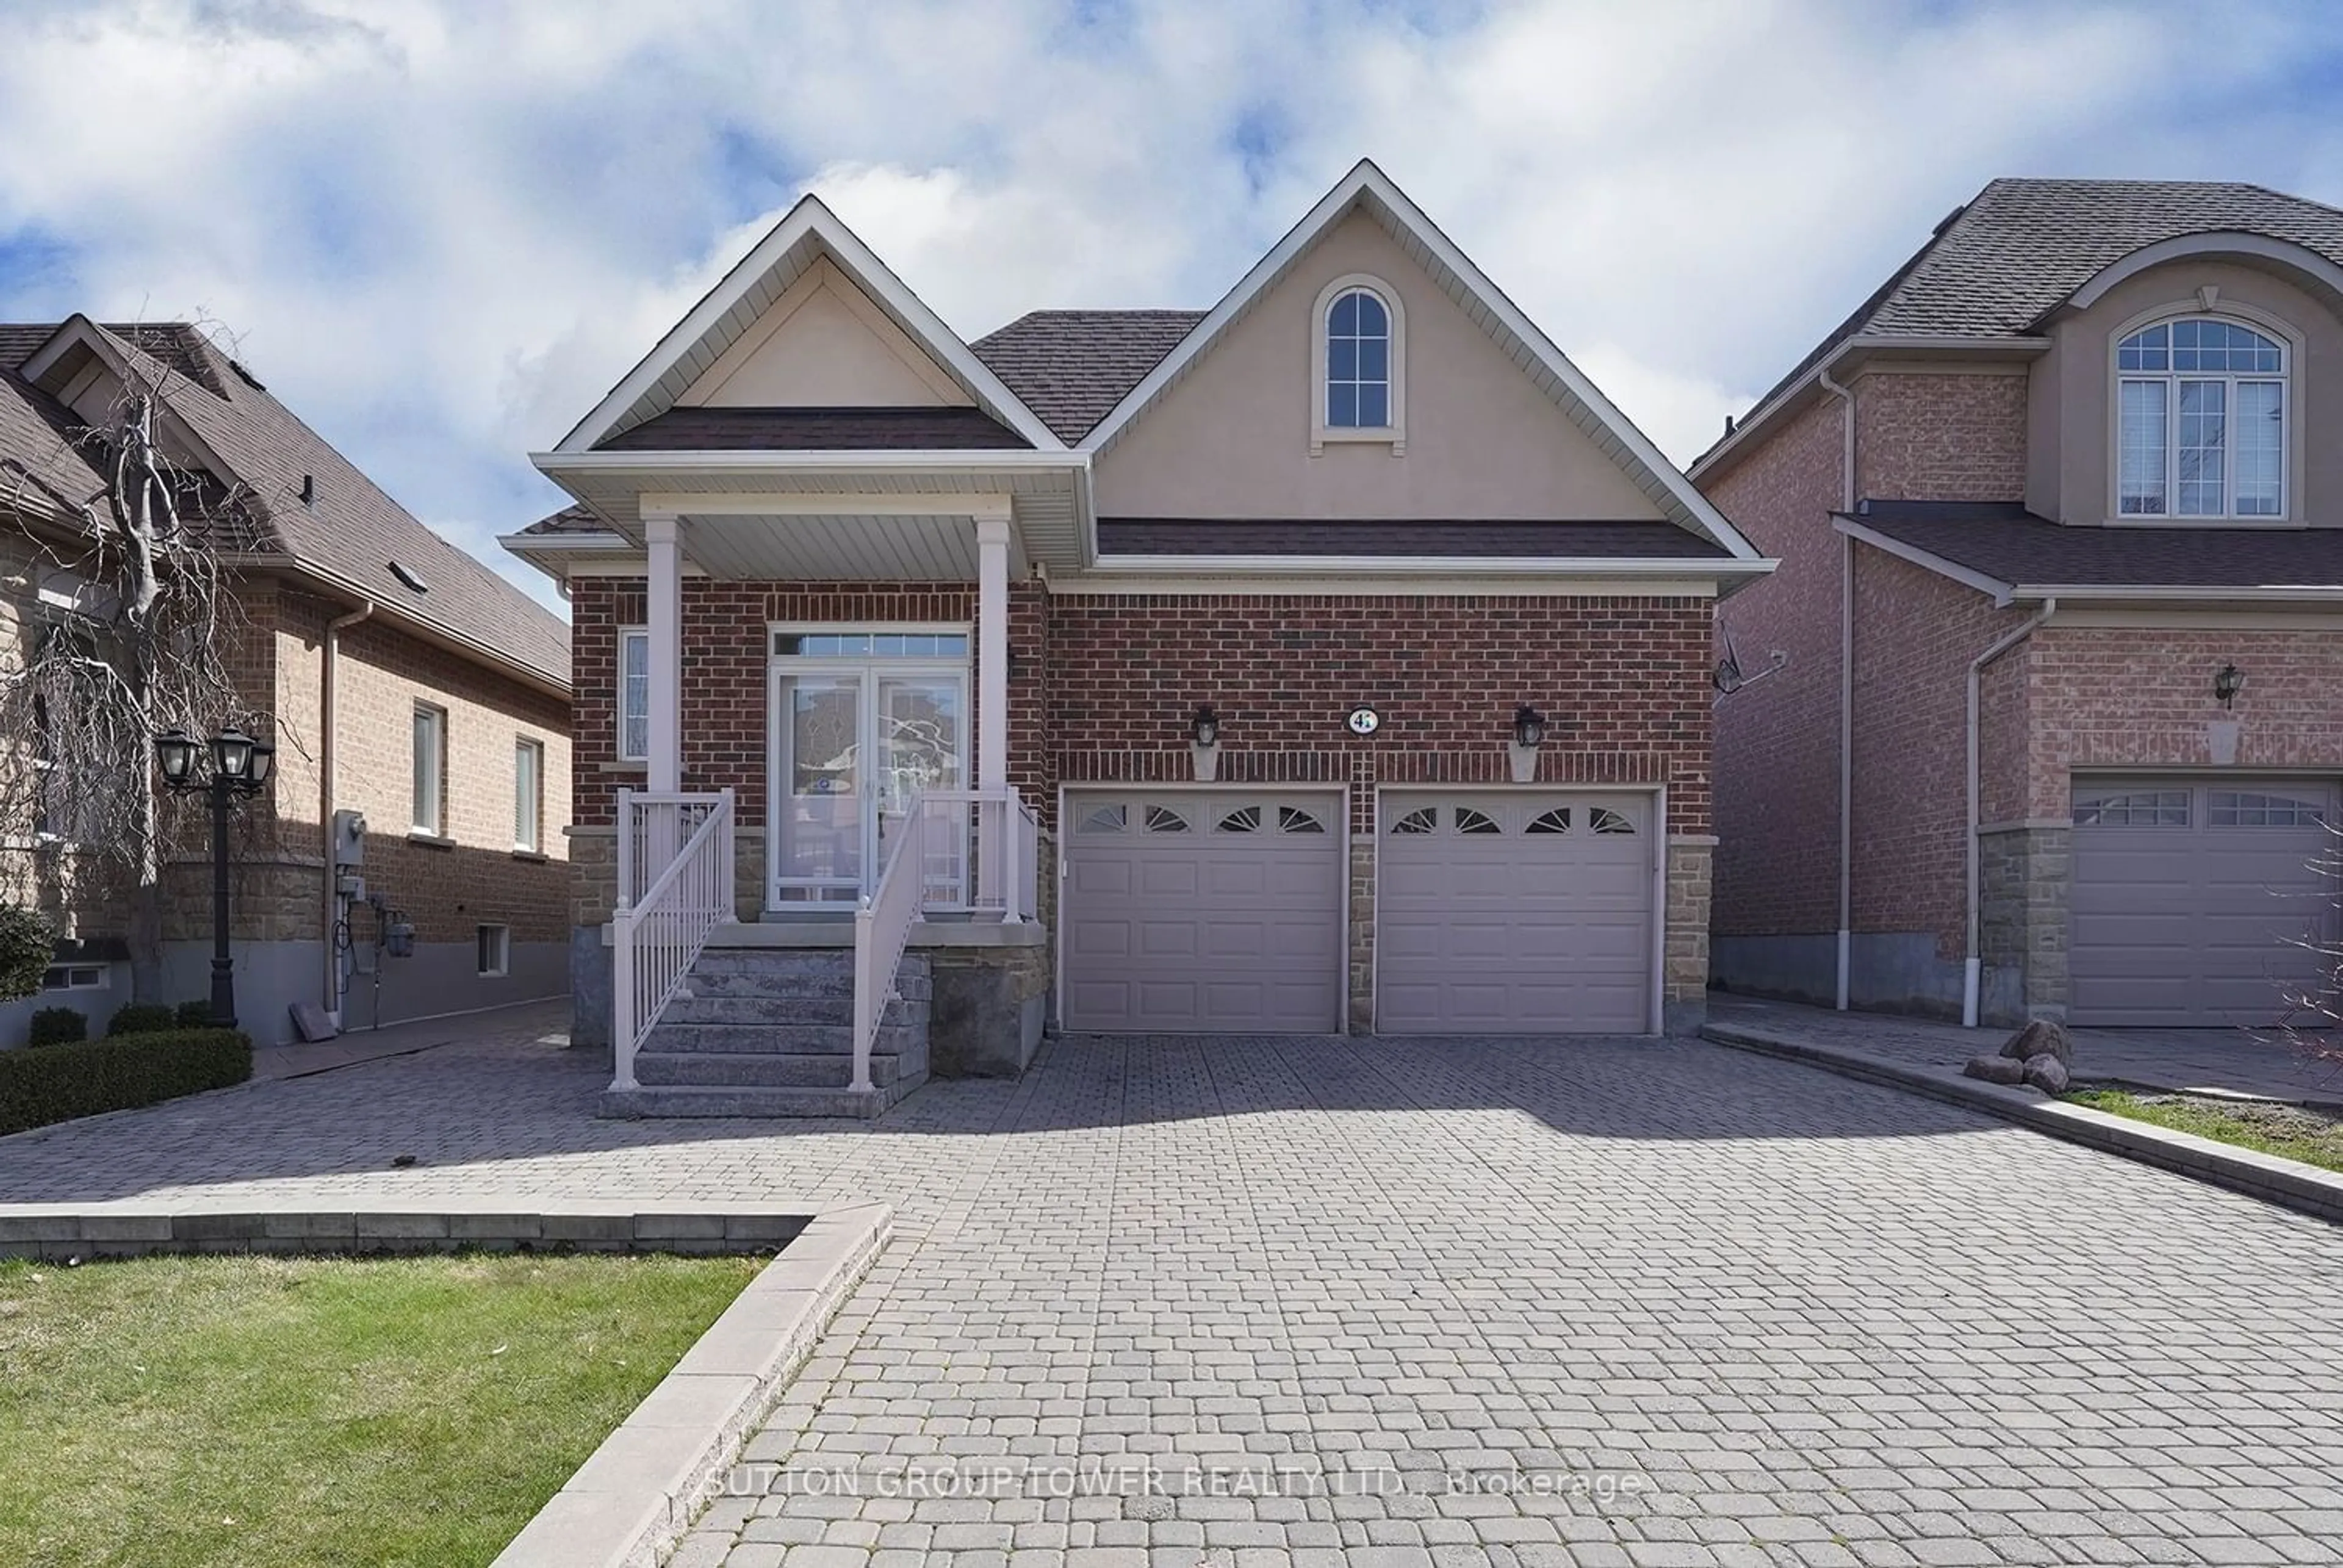 Home with brick exterior material for 41 Vas Rd, Vaughan Ontario L4H 3B9